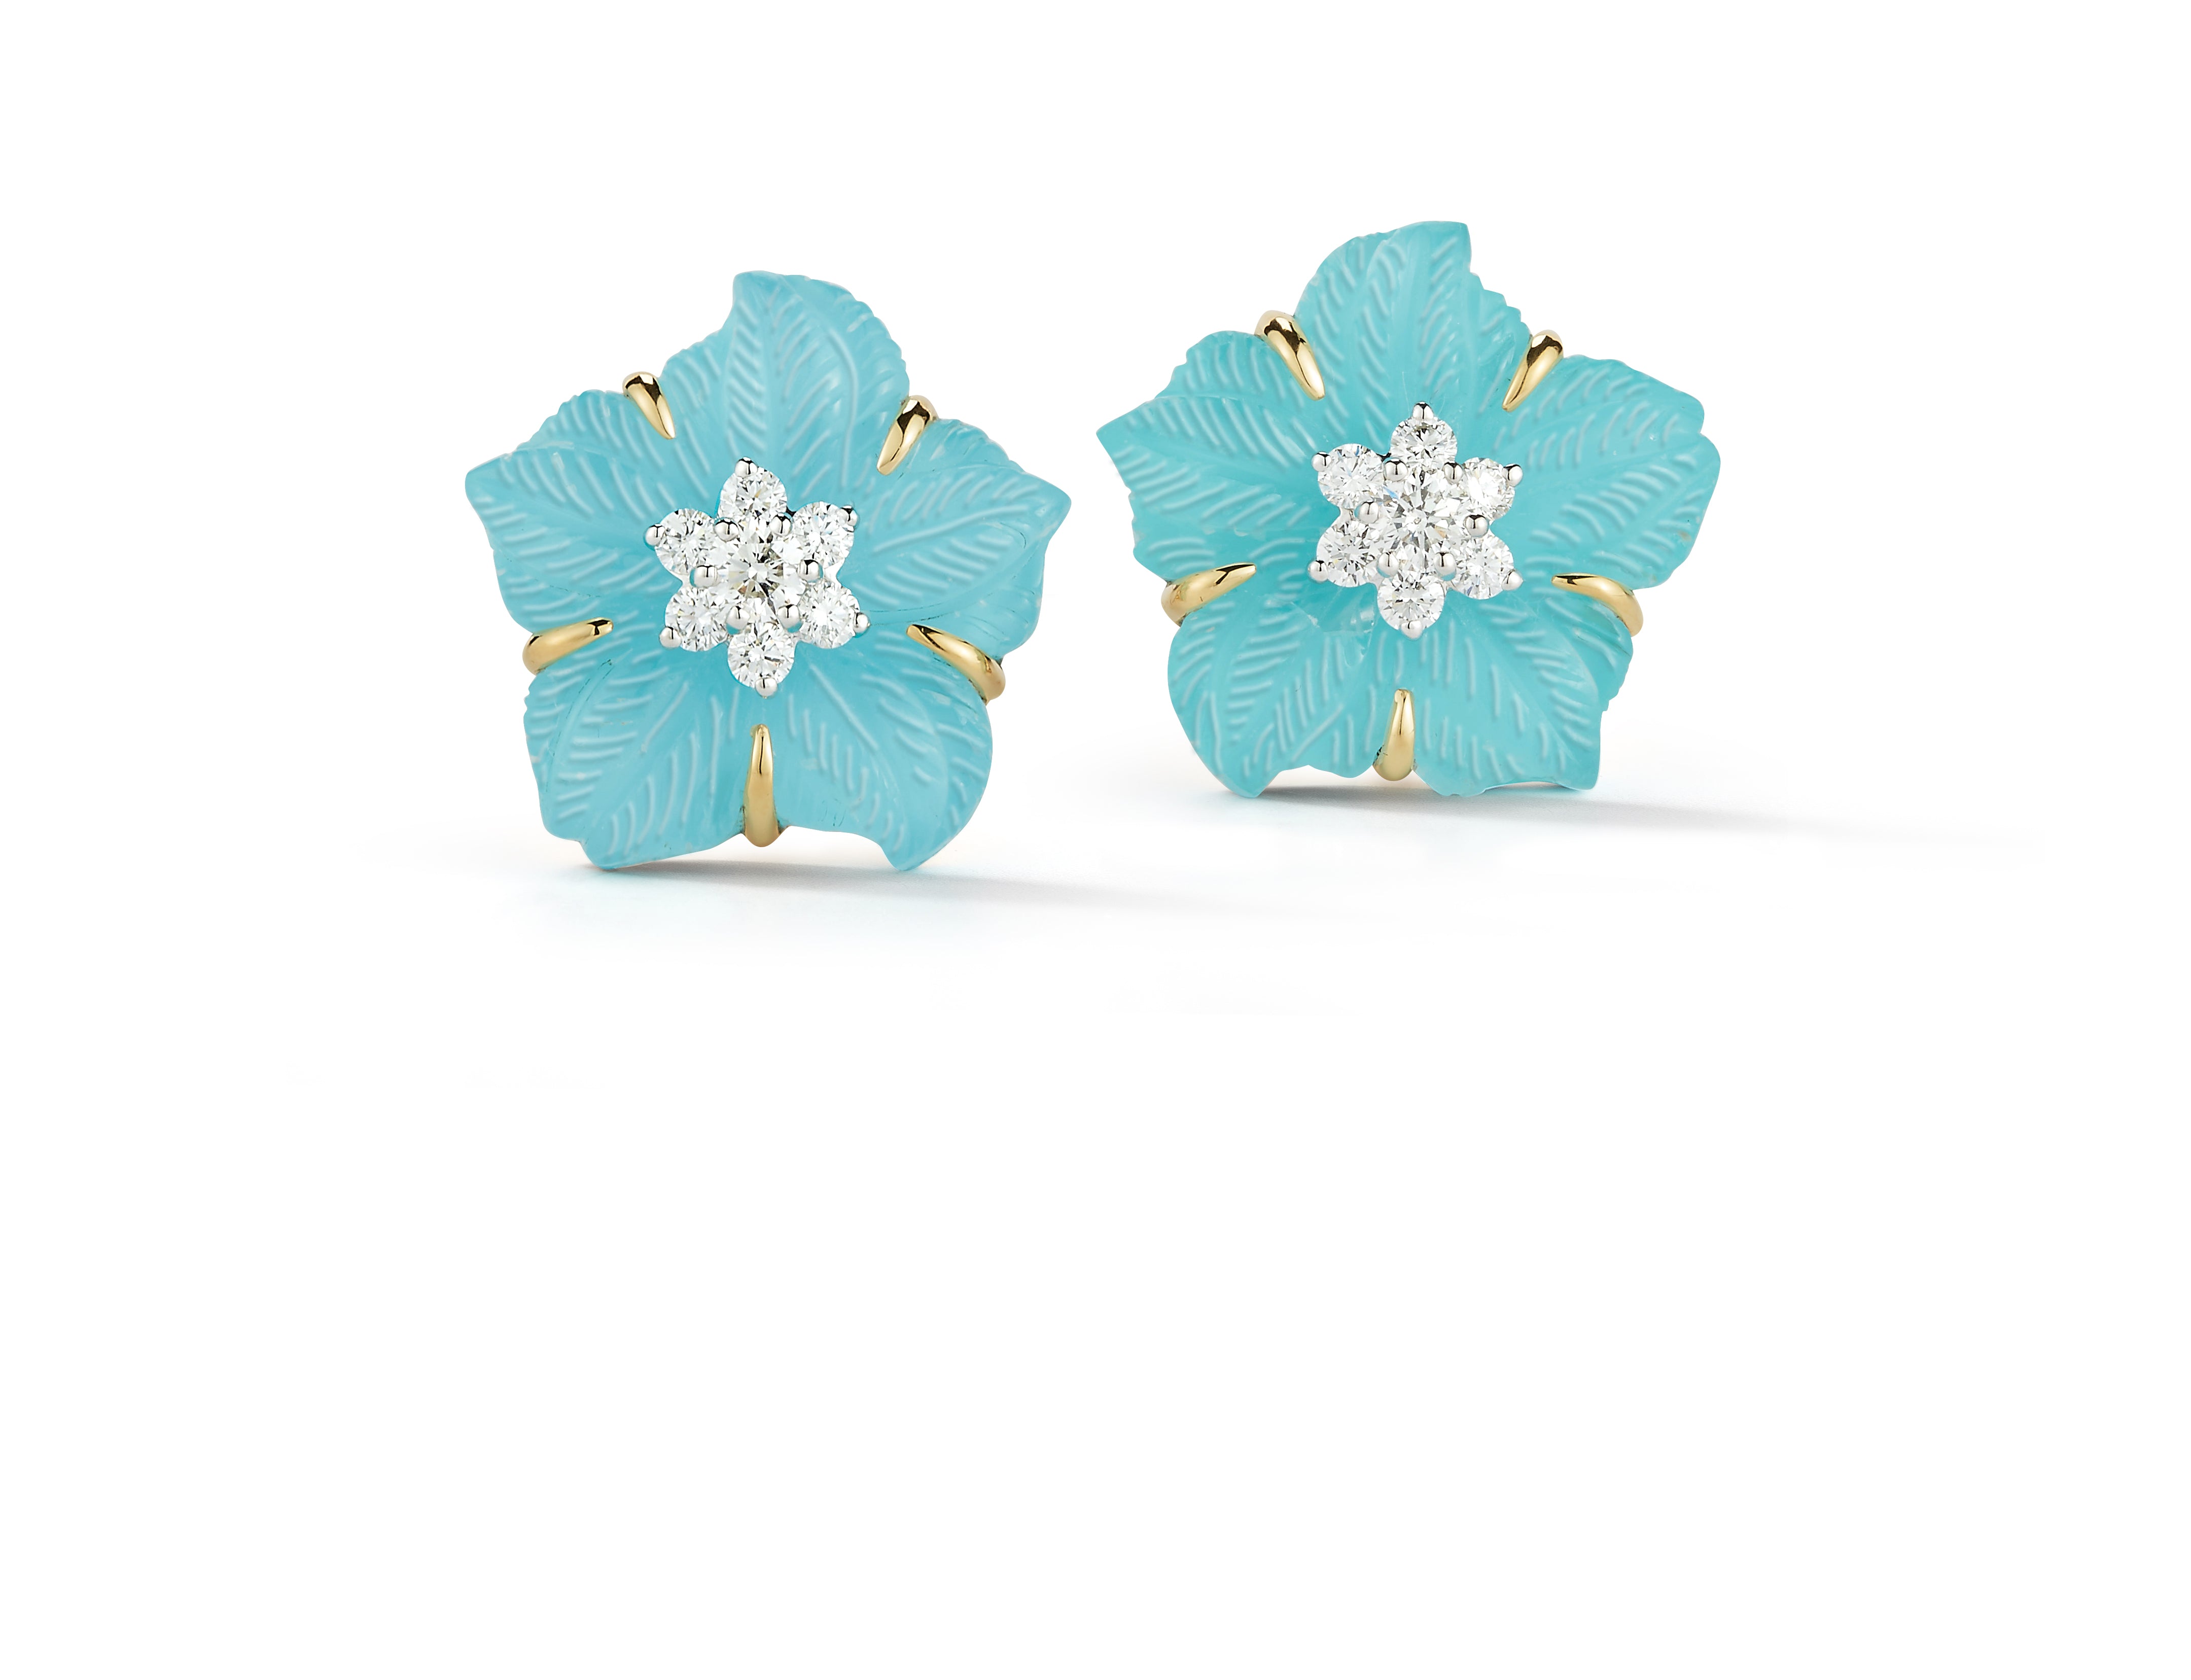 Clematis Earrings in Turquoise & Diamond